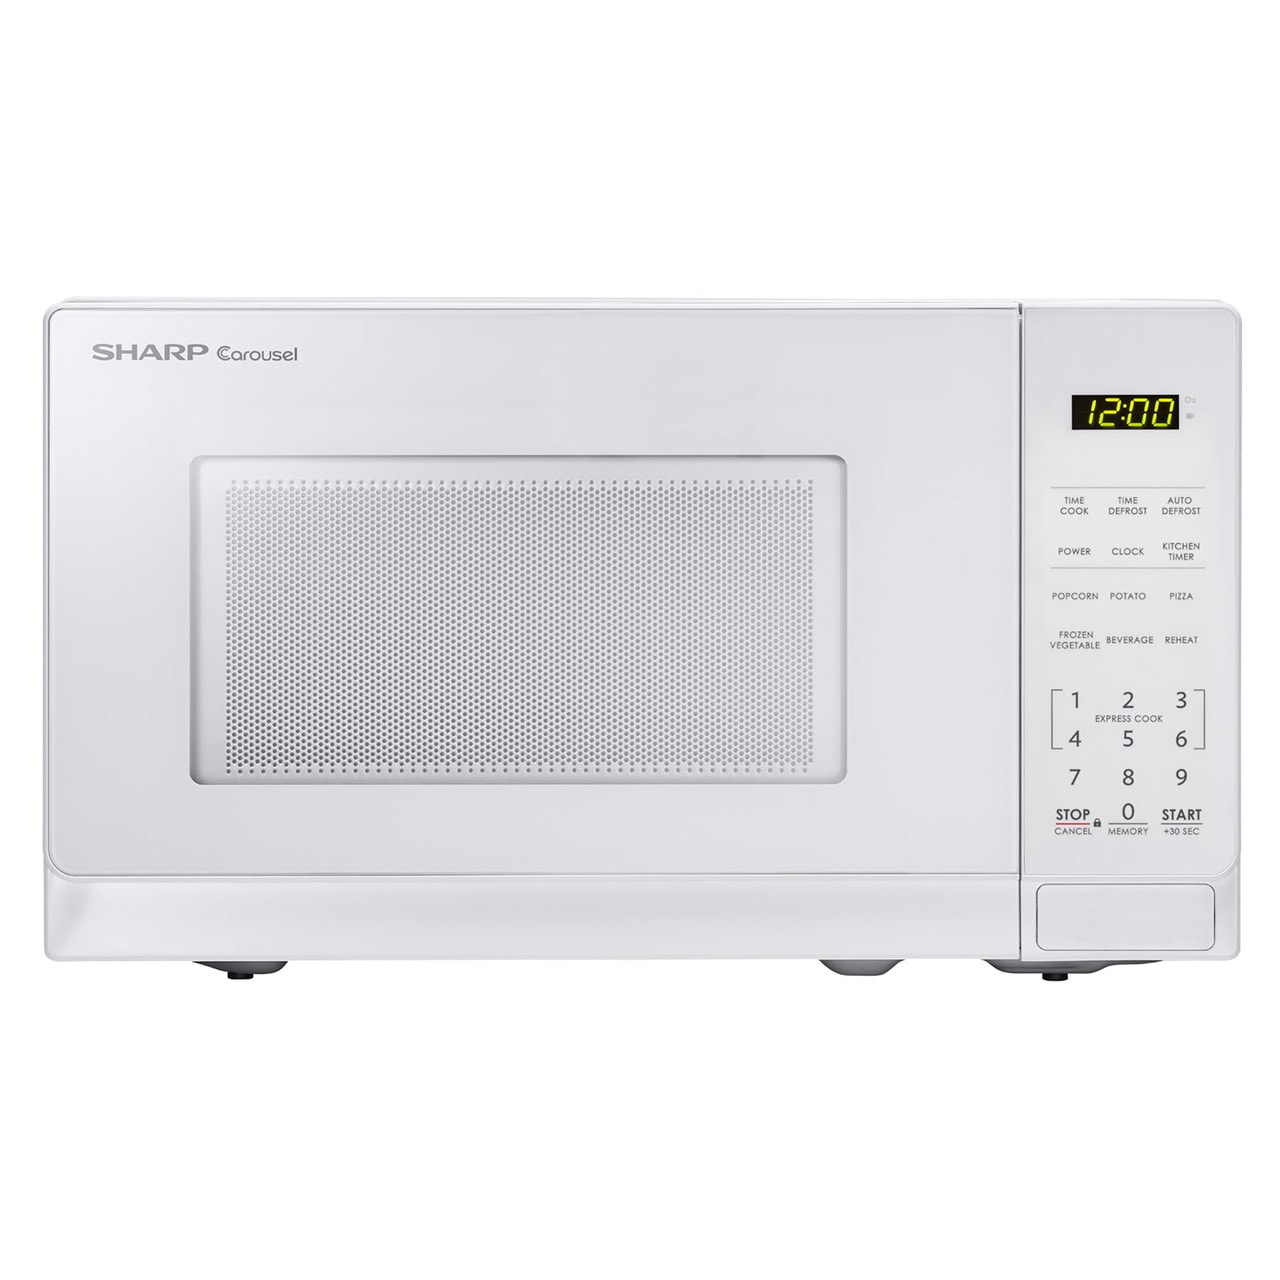 Easy Clean Small White Microwave with 6 Power Levels Function Defrost Smad Microwave Ovens 700 W 17 L Manual Control 